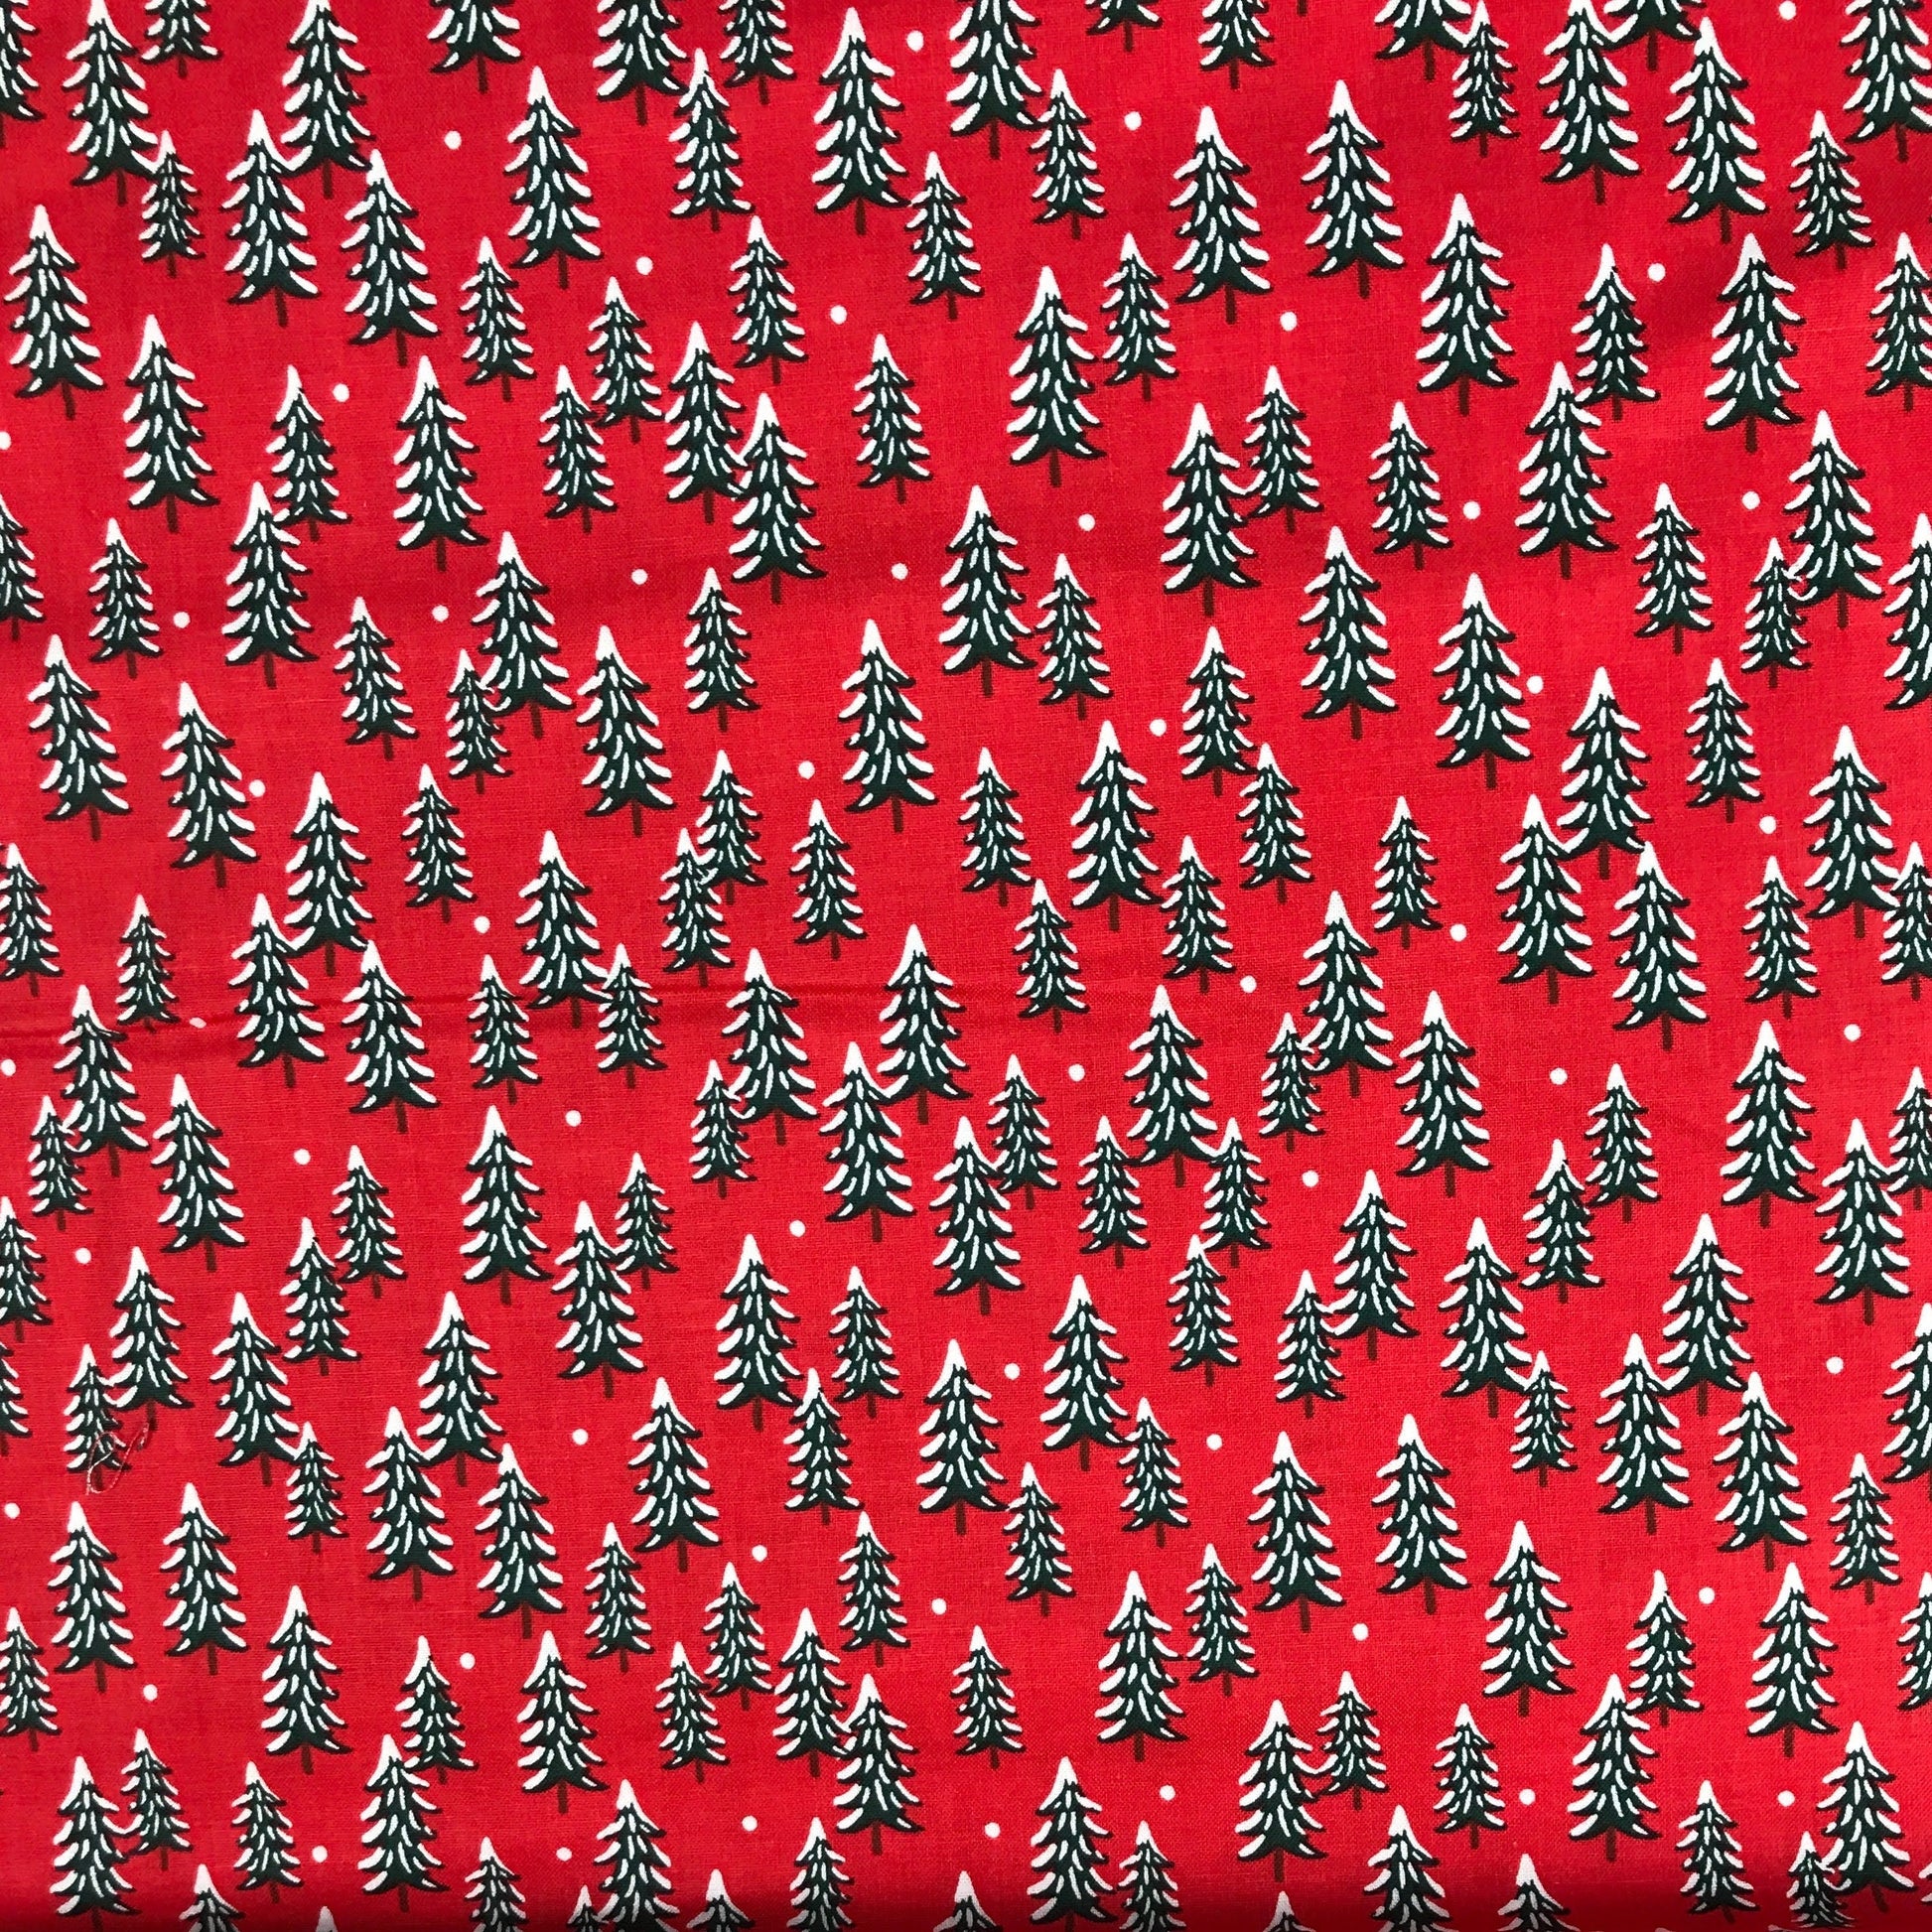 Rifle Paper Co Holiday Classics Fur Trees Red Silver Metallic Fabric Fetish